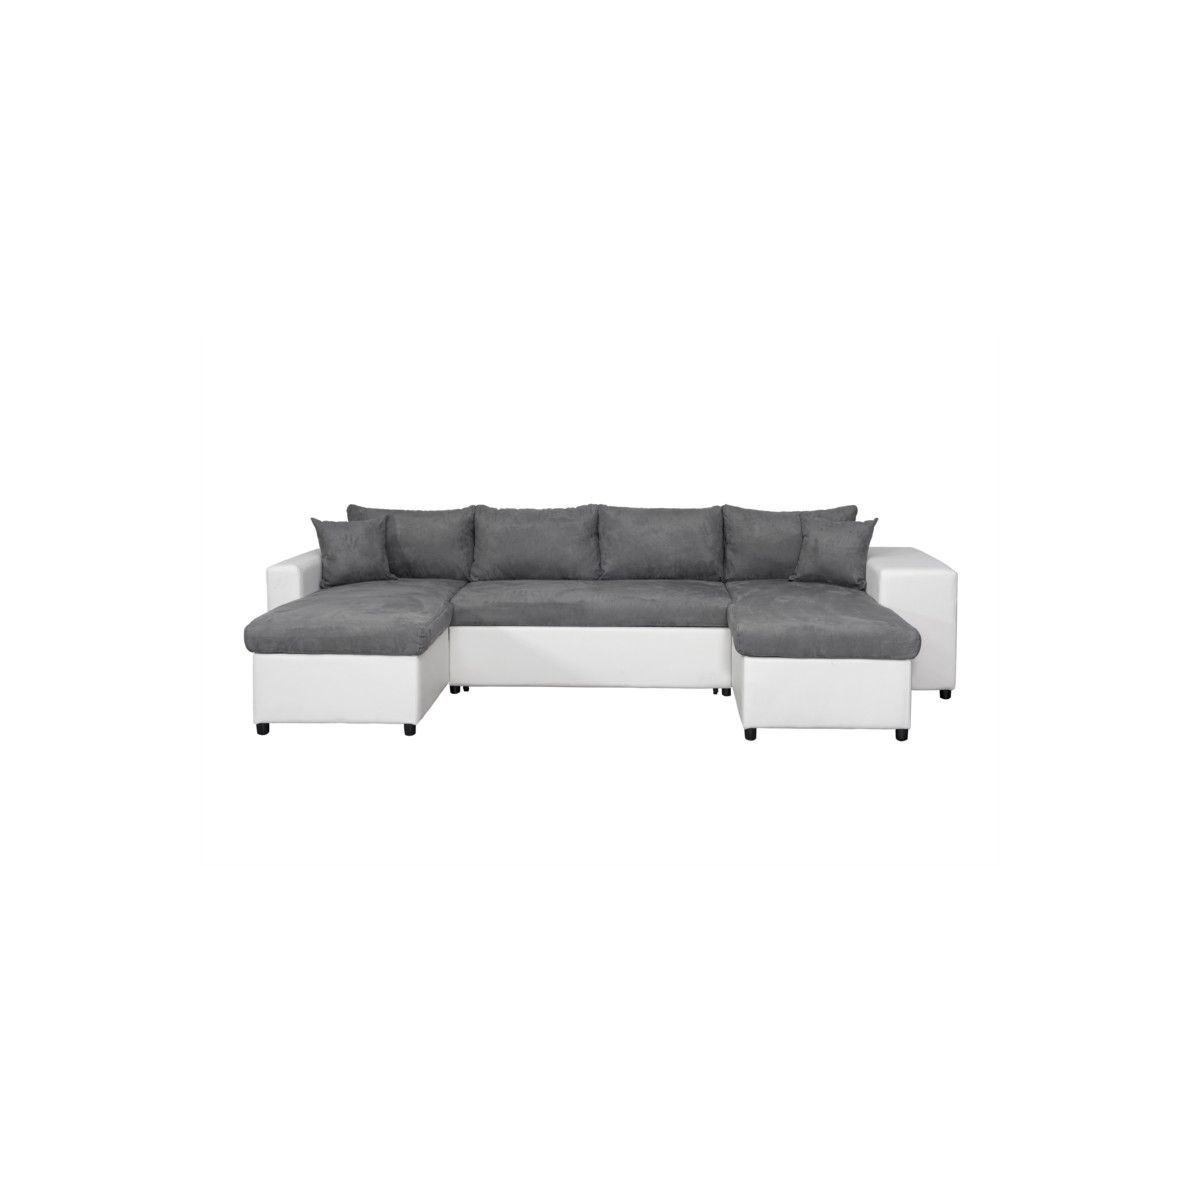 Sofa Bed 6 Places Fabric Pu Microfiber Niche On The Right Katia Grey, White Inside Microfiber Sectional Corner Sofas (View 14 of 15)